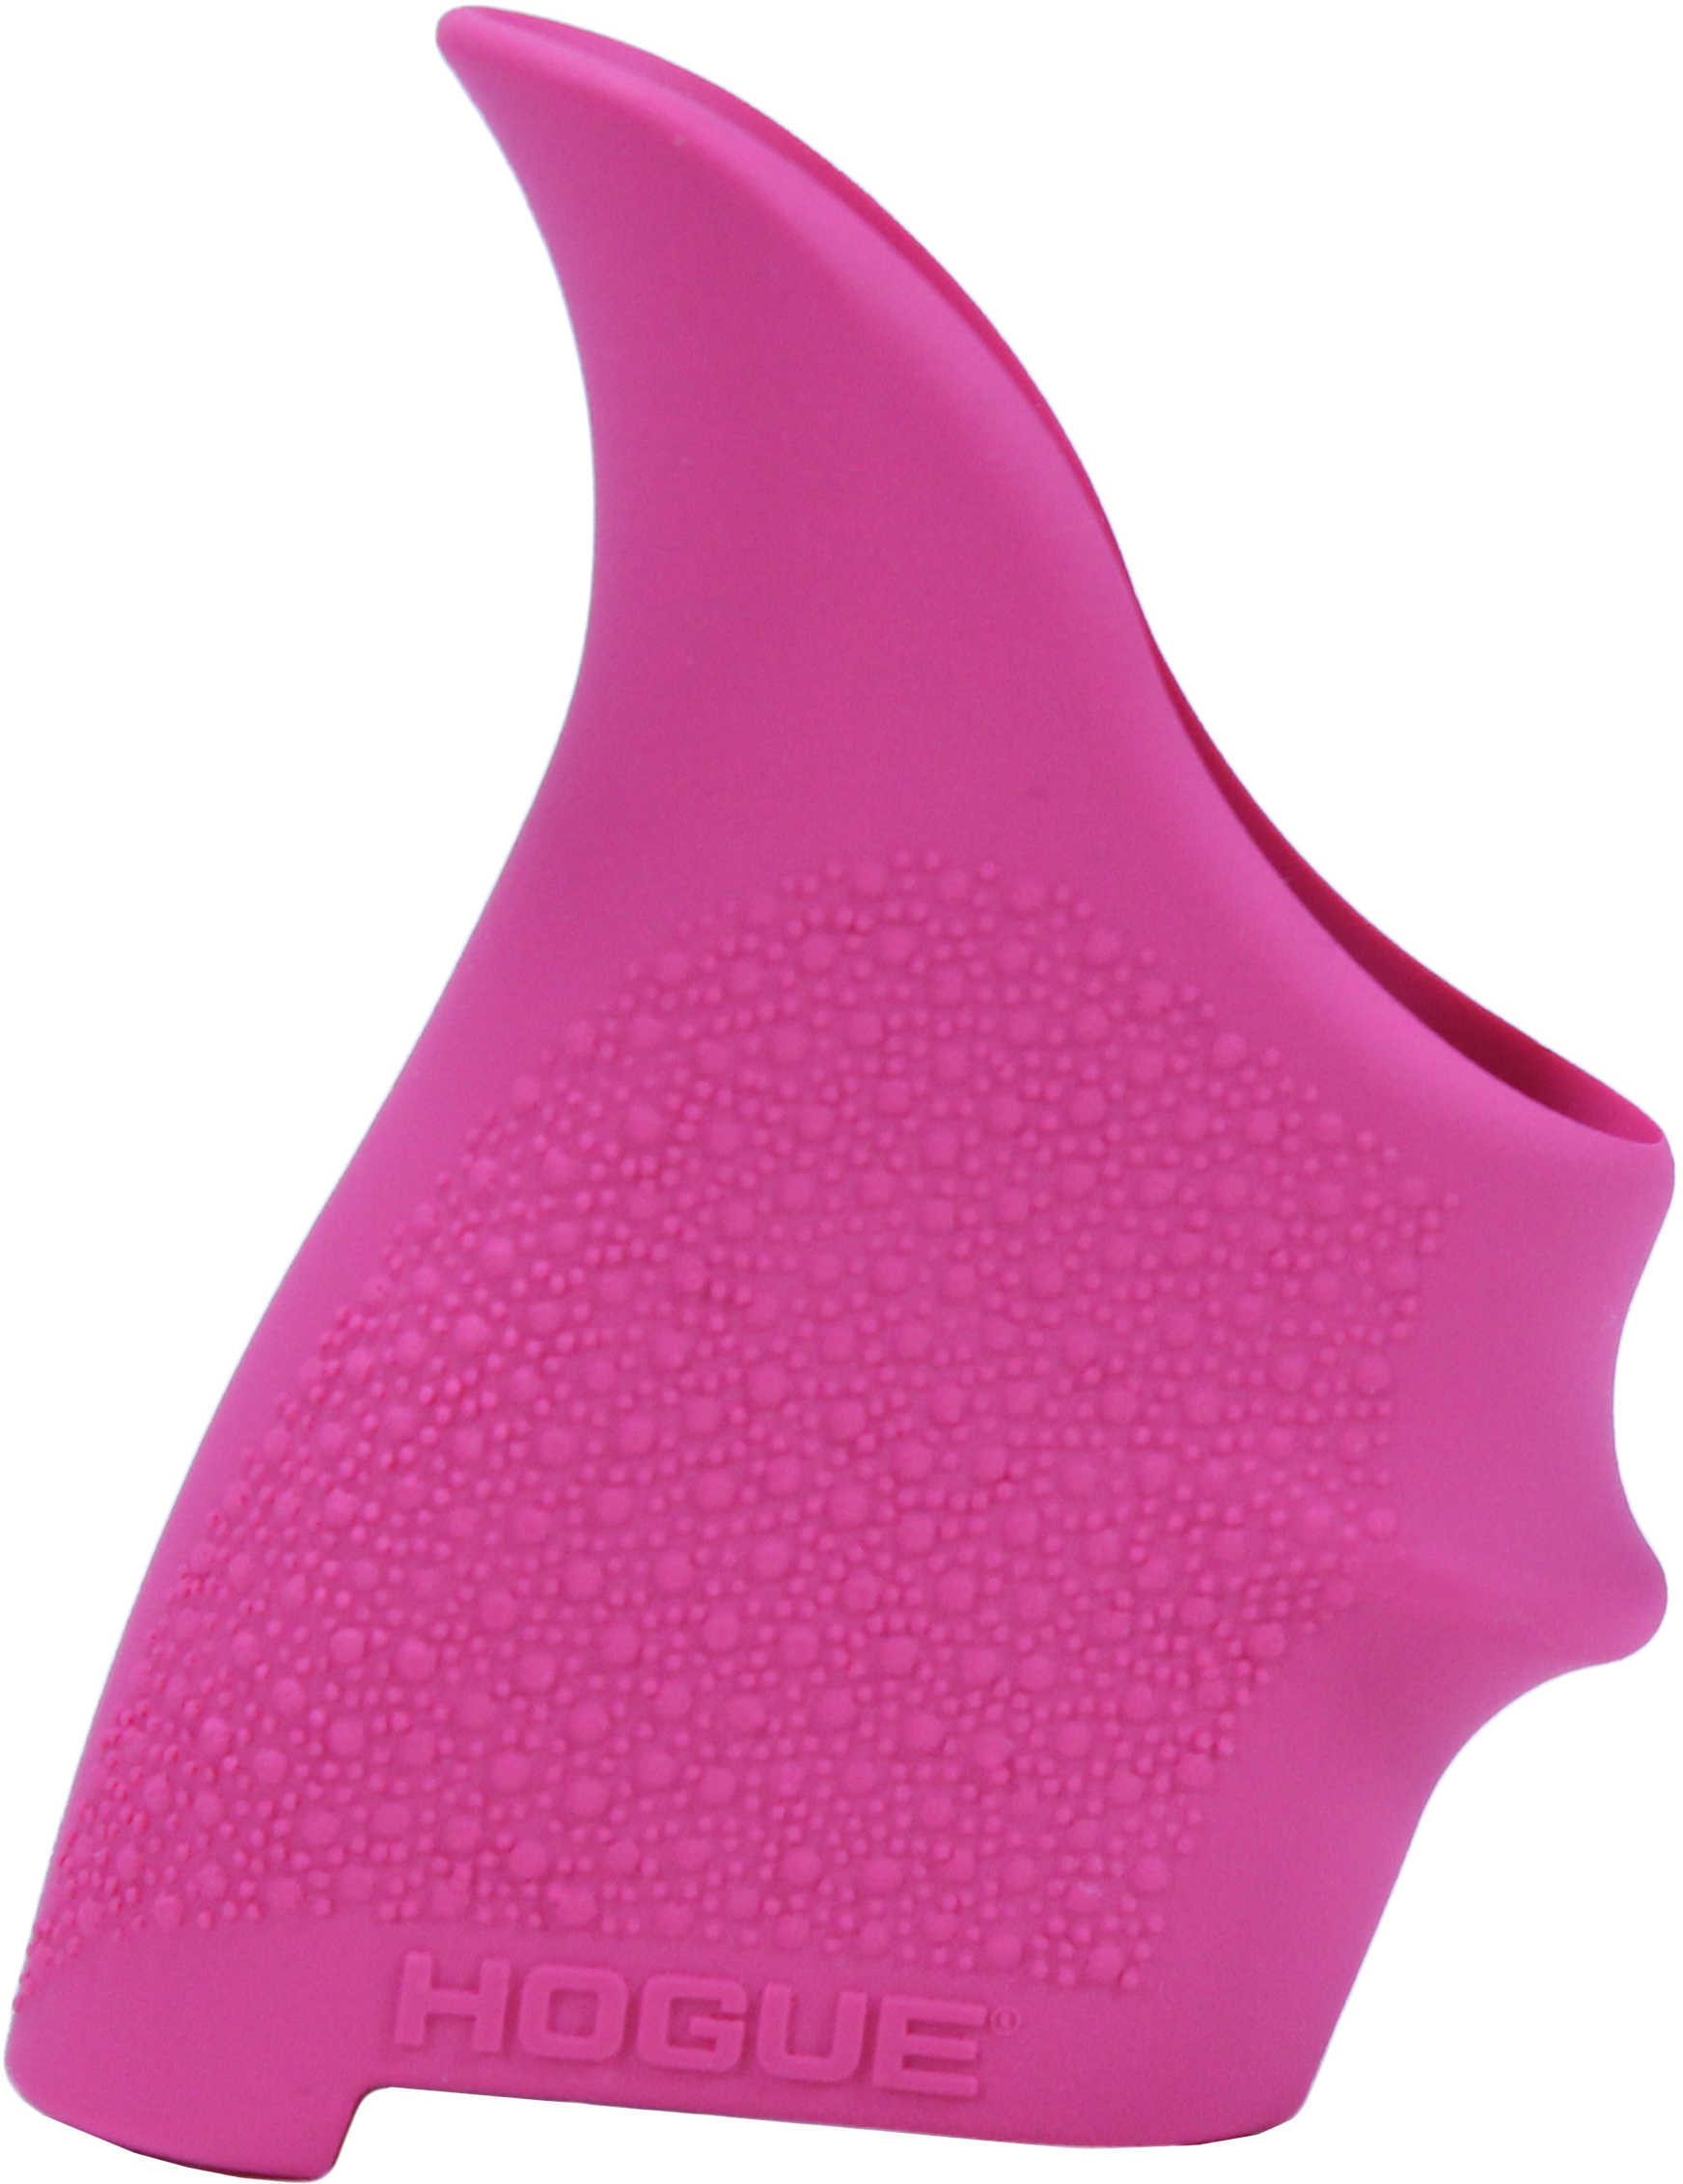 Hogue Grips HandAll Beavertail Fits S&W M&P Shield/Ruger LC9 Rubber Finger Grooves Pink 18407